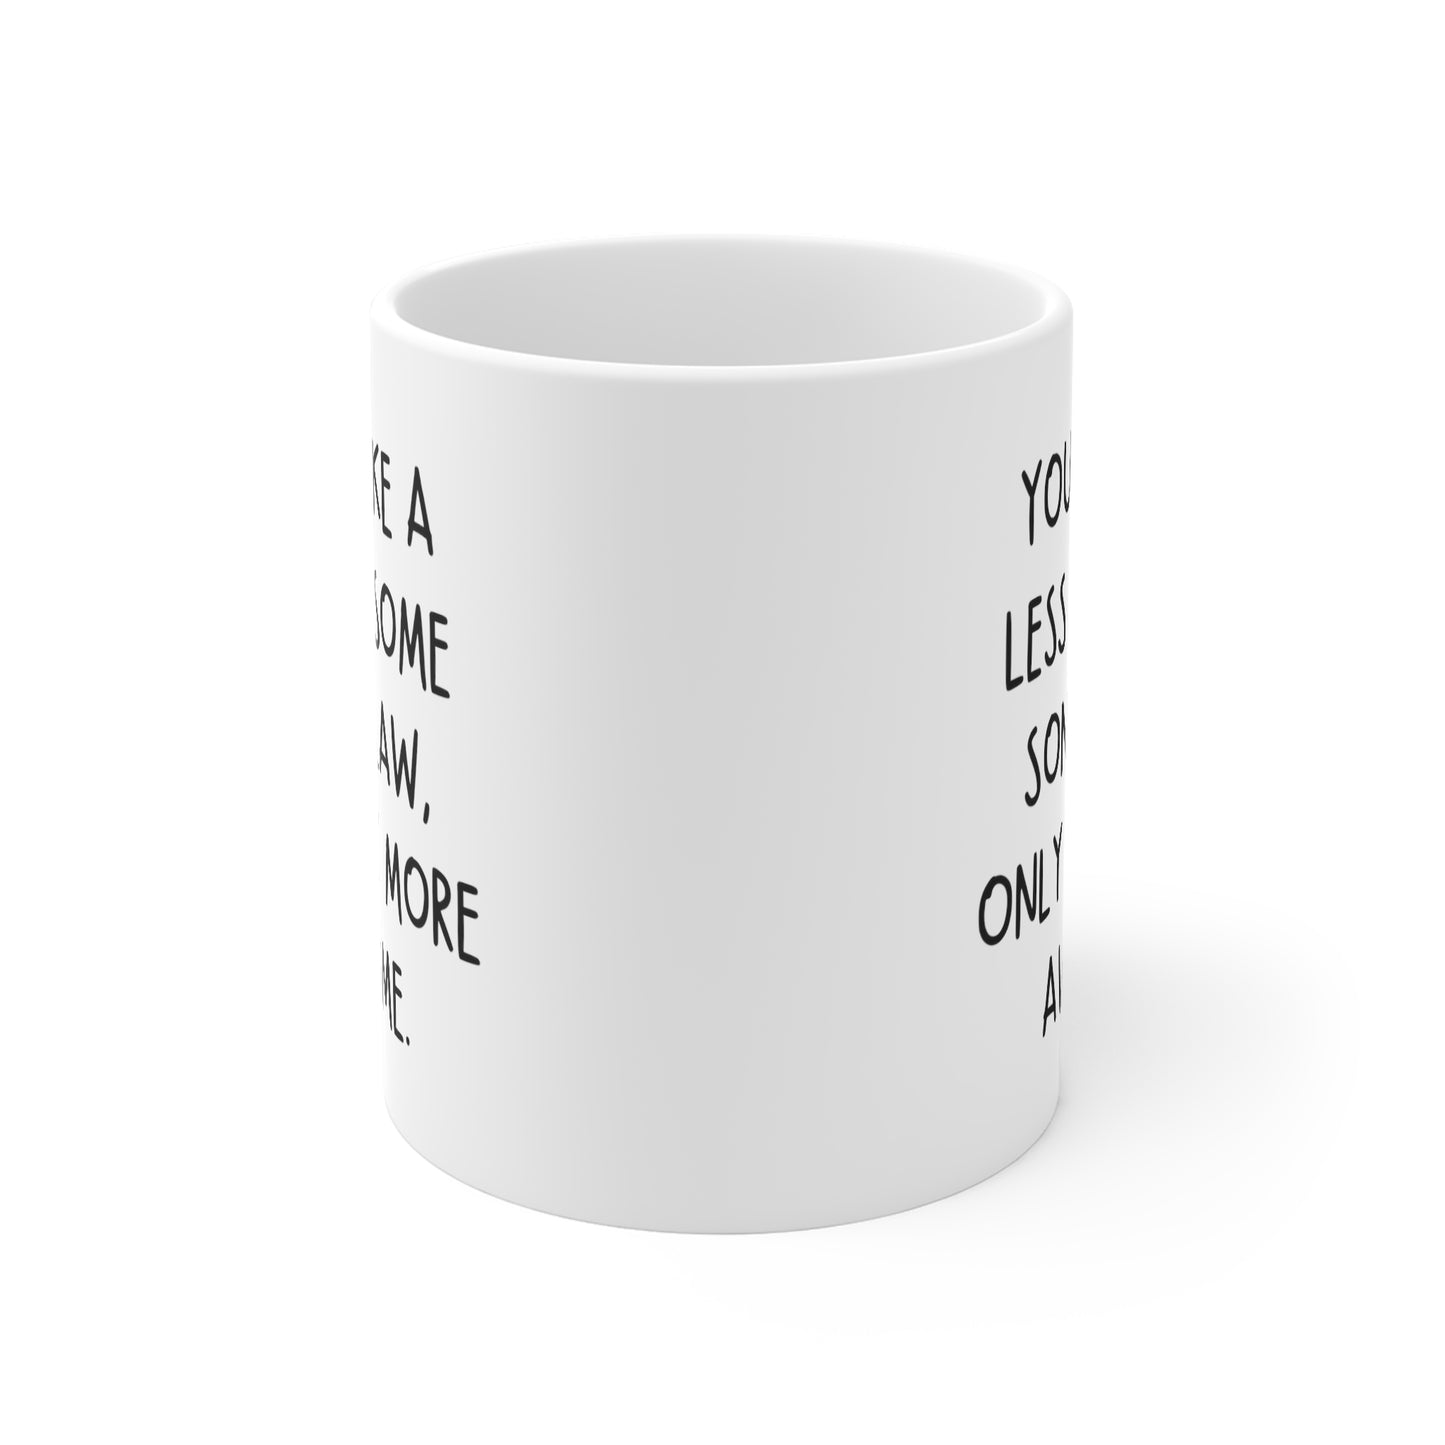 You're Like A Less Awesome Son-In-Law, Only Way More Awesome | Funny, Snarky Gift | White Ceramic Mug, Handwritten Block Font